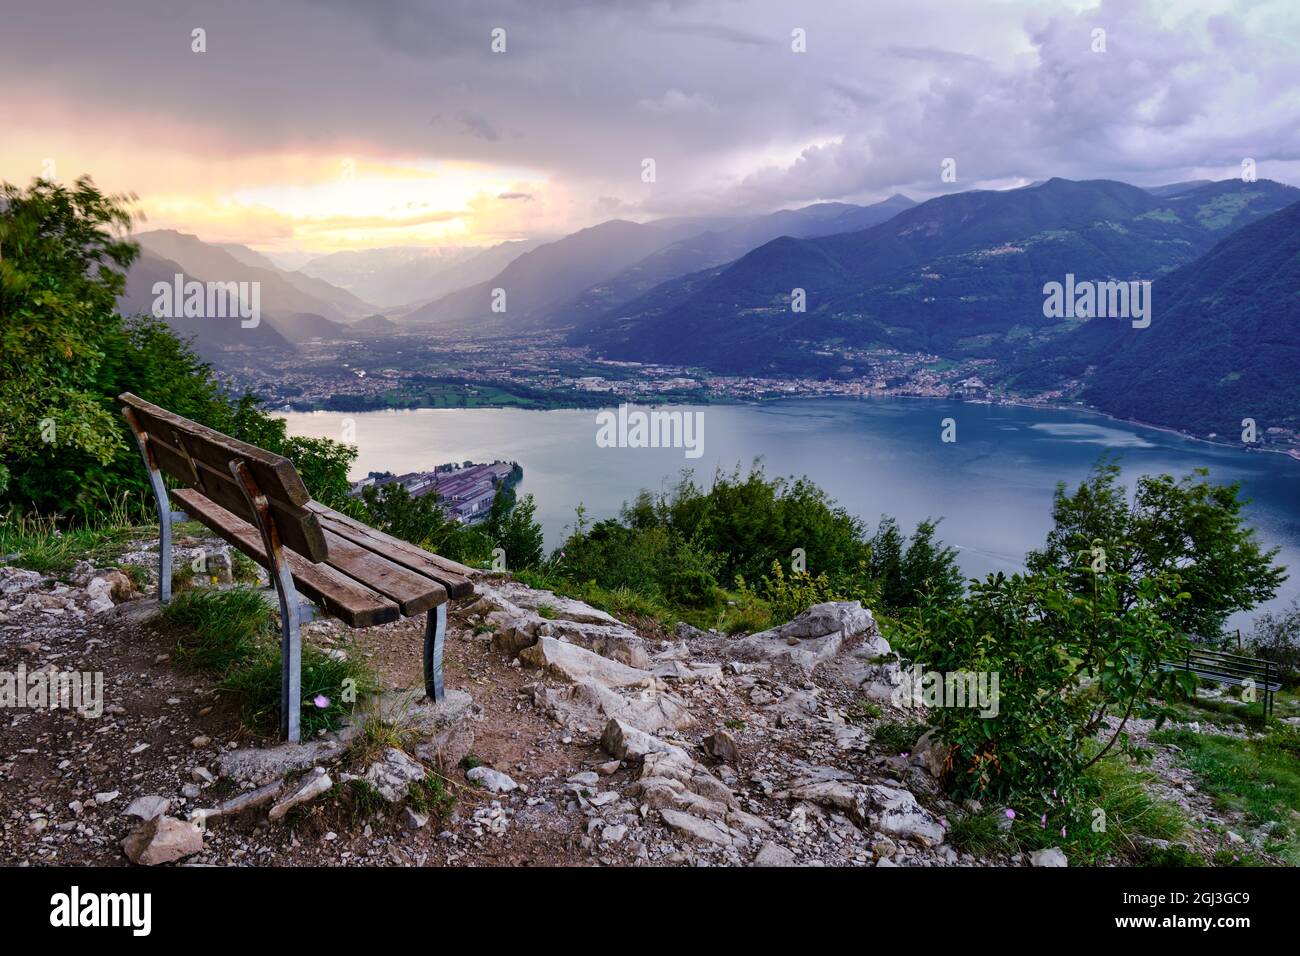 Sunset over the lake, the mountains and empty bench, Lake Iseo, Lombardy, Italy Stock Photo